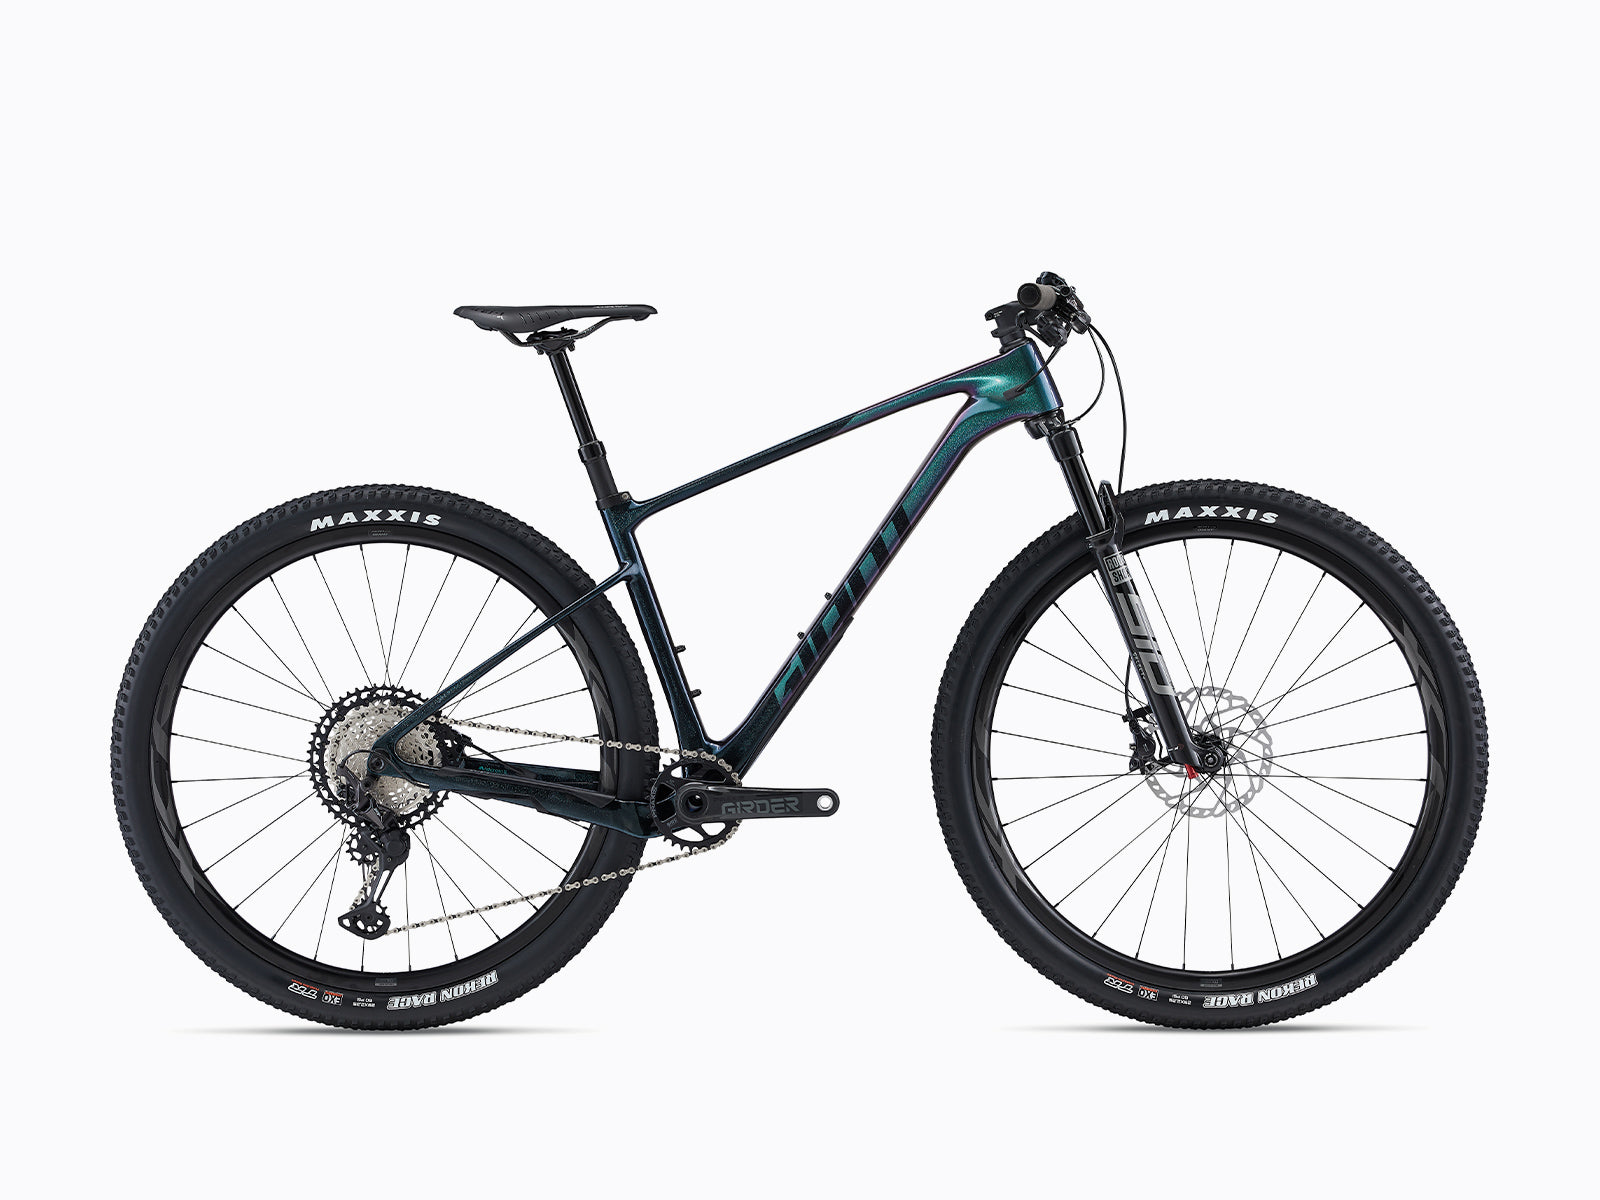 image features a Giant Xtc Advanced SL 29 a full suspension mountain bike now available at Giant Melbourne, a bike shop in Australia